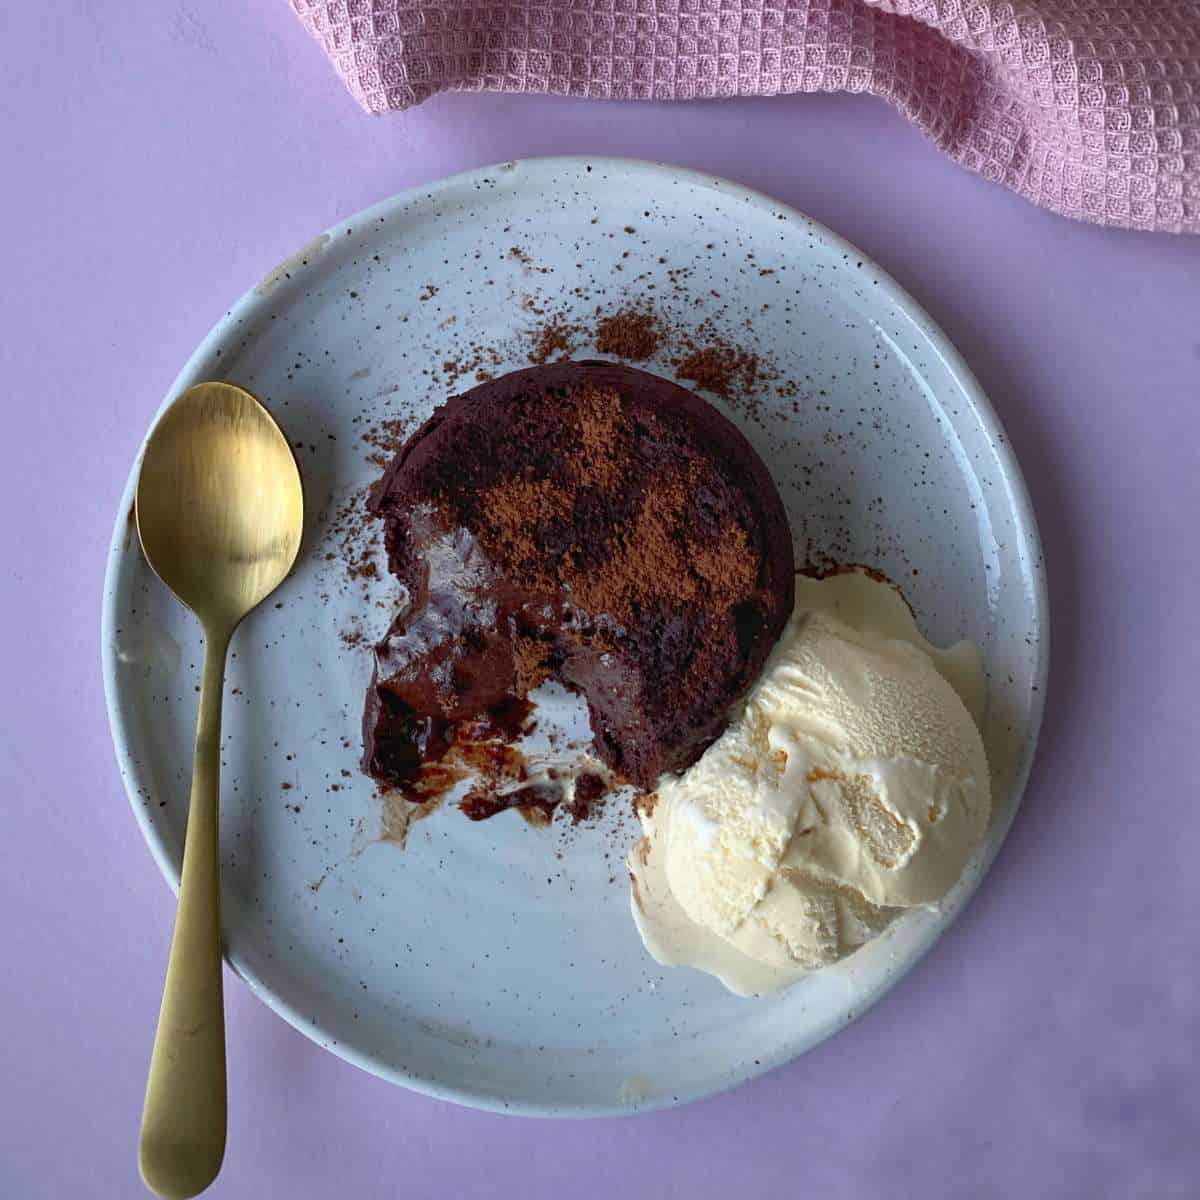 A Chocolate Fondant with a gooey chocolate centre on a plate with a scoop of ice cream.